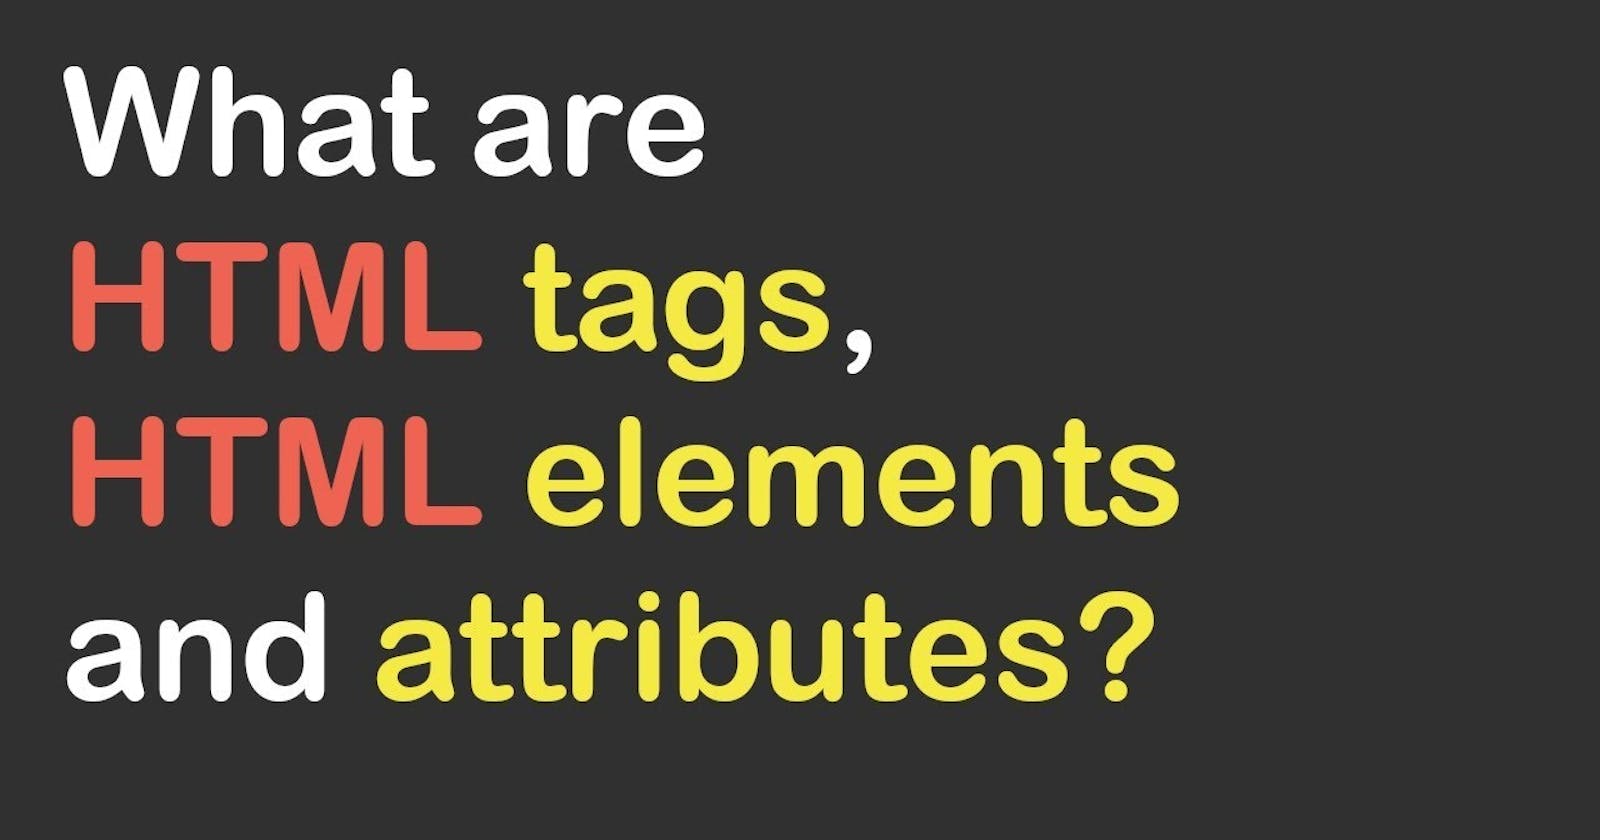 What are tags, Element and attributes in HTML?